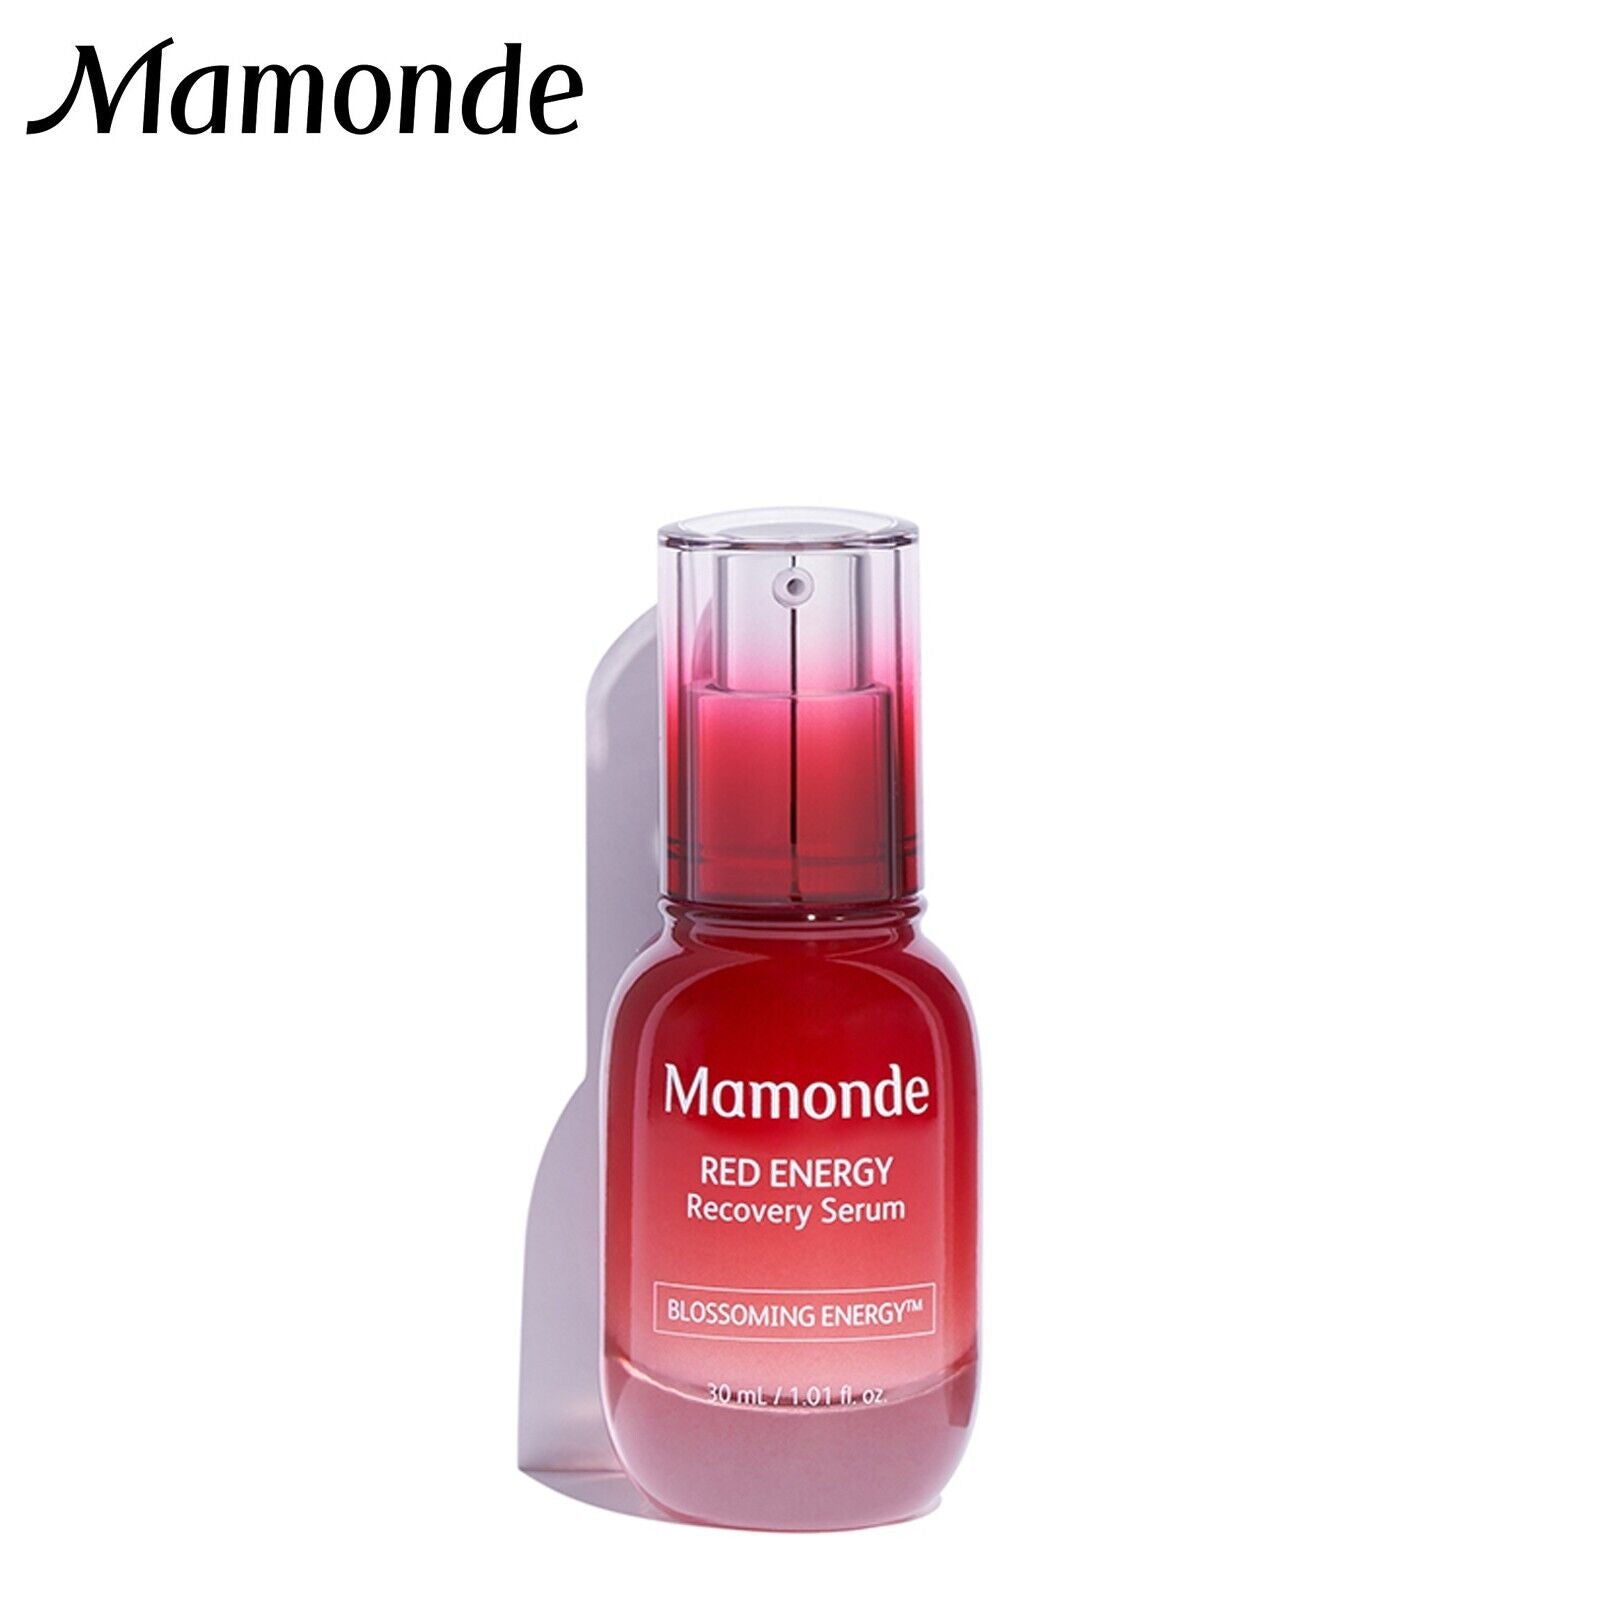 MAMONDE - Red Energy Recovery Serum (Discounted)